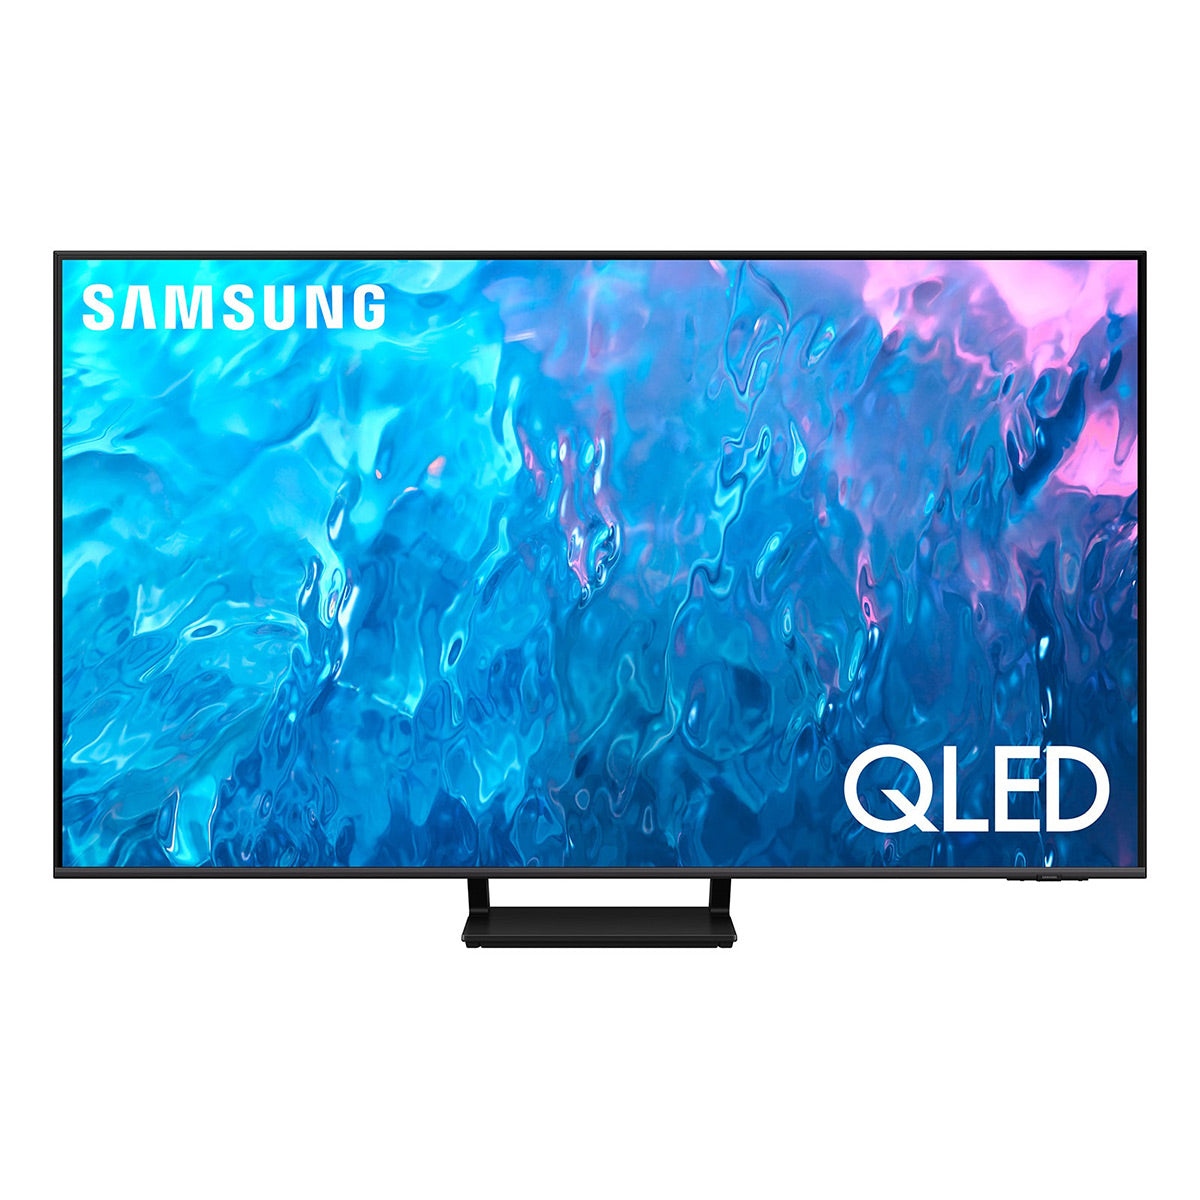 Samsung QN75Q70CA 75" QLED 4K Smart TV with Quantum HDR, 100% Color Volume, Dual LED Backlights, & Object Tracking Sound (2023)